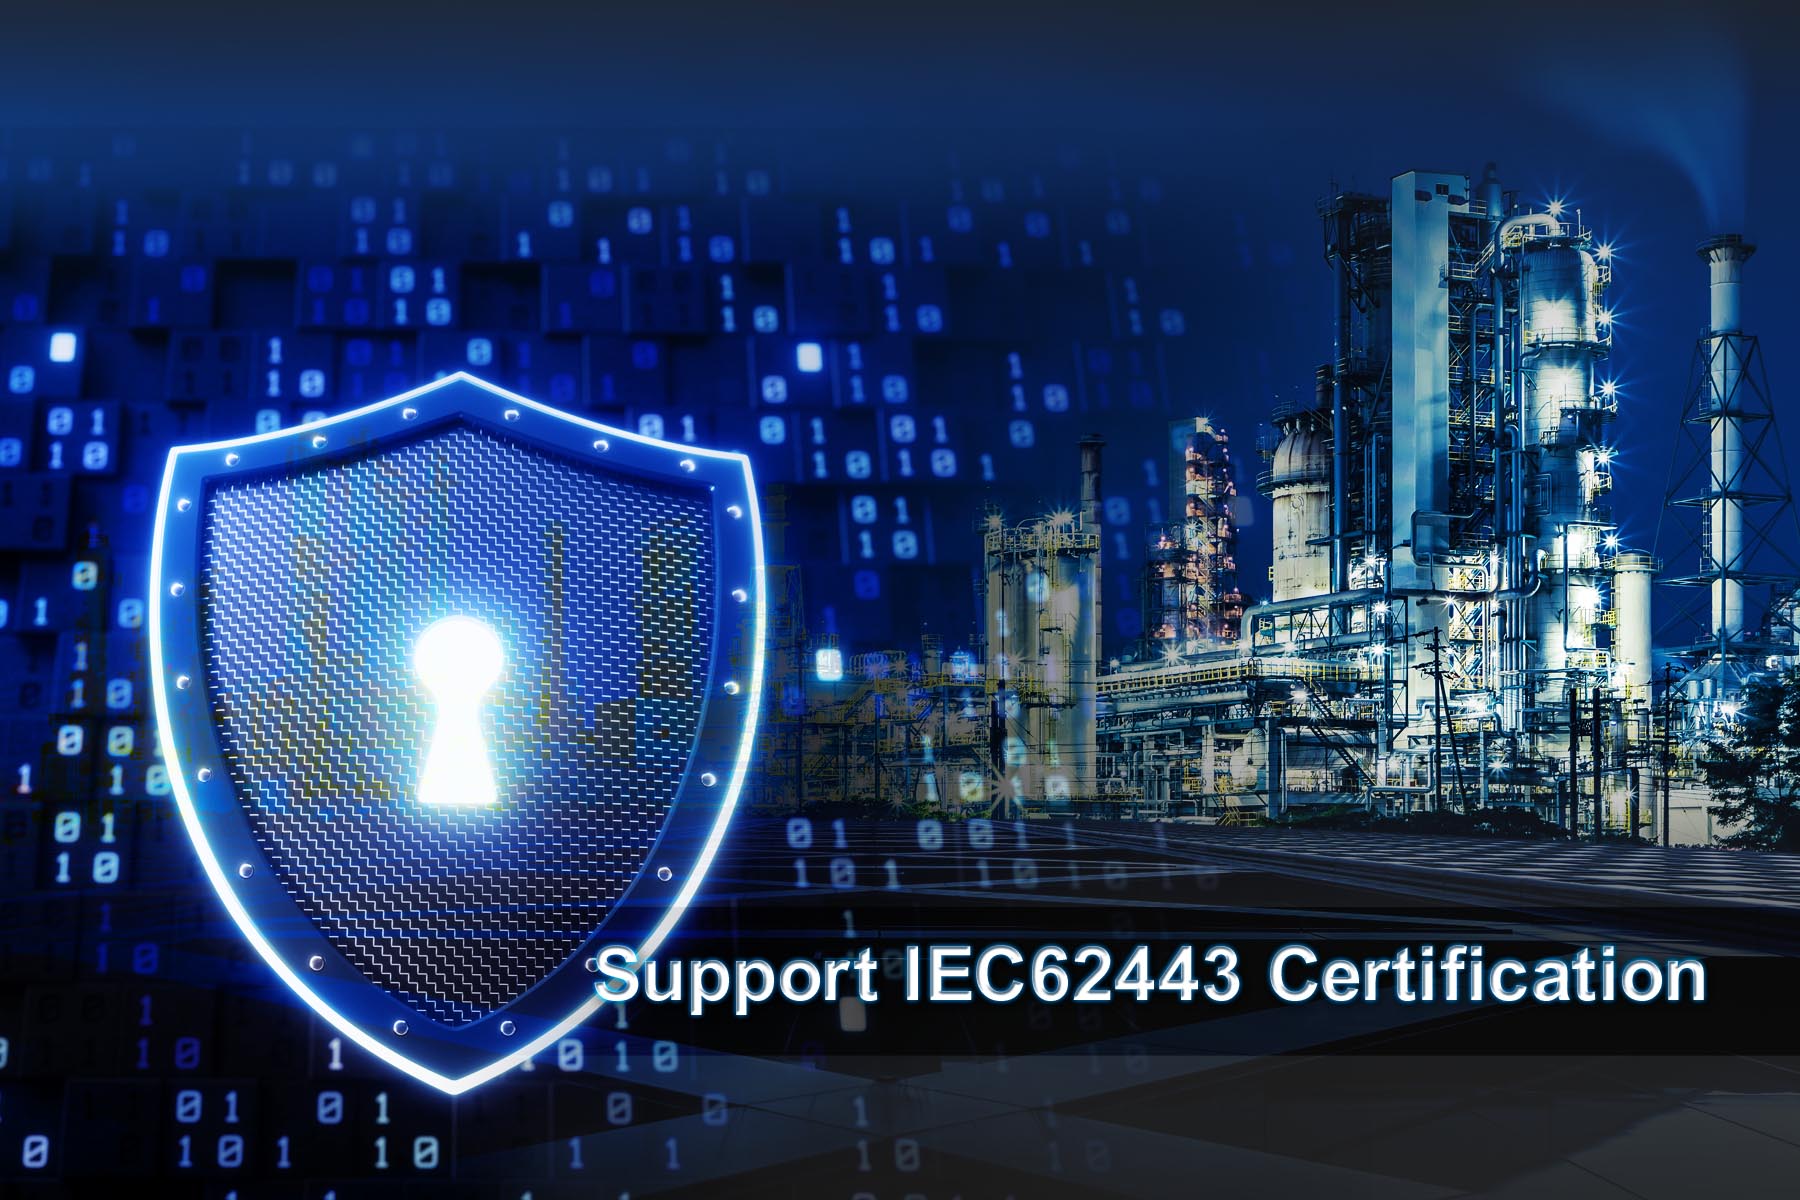 Security Solution Enables Certification Under IEC 62443-4-2